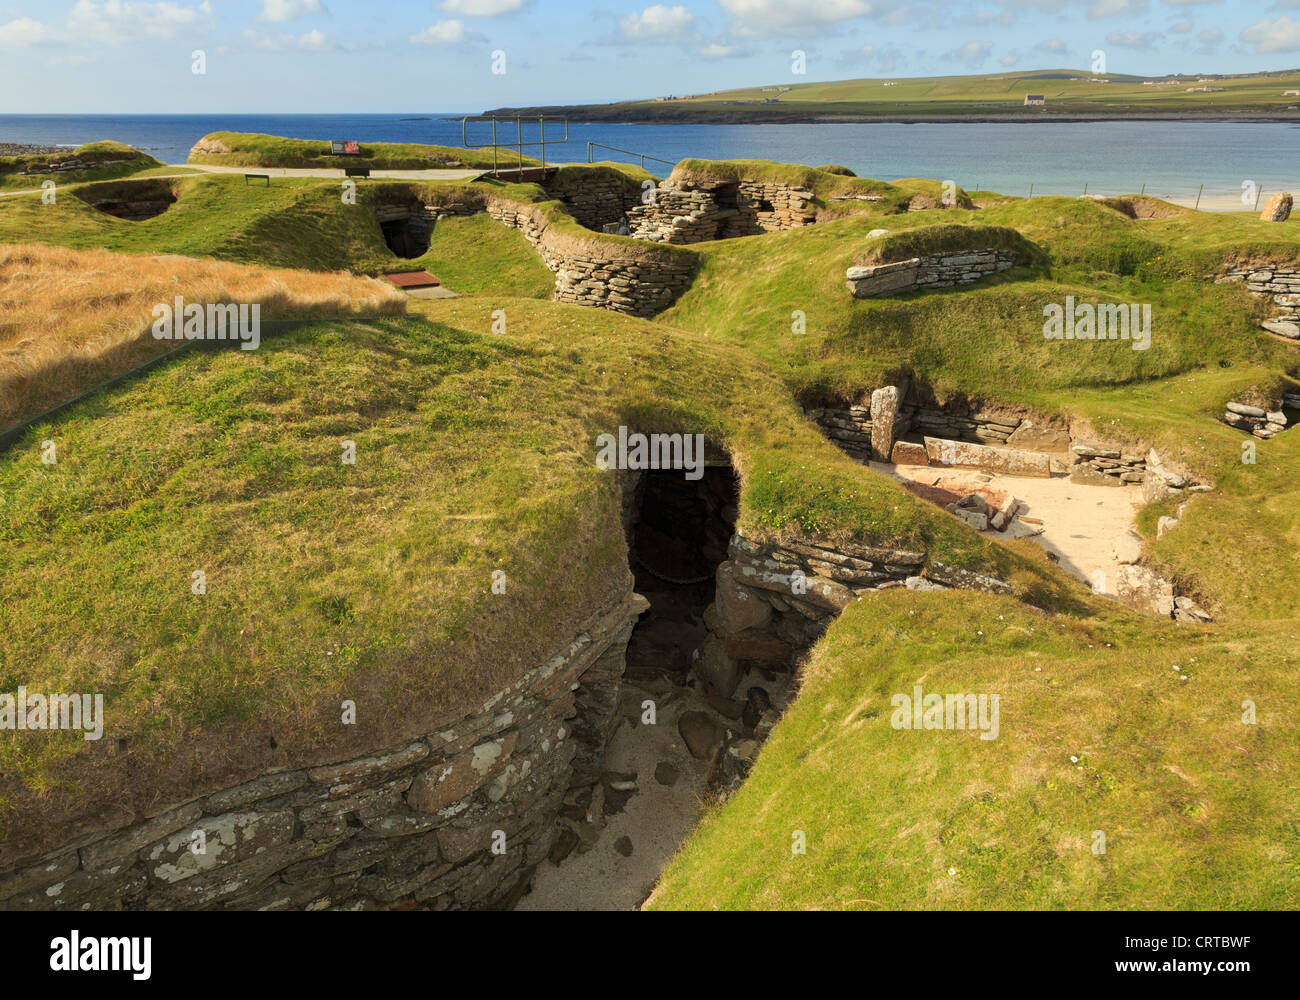 Excavations of ancient prehistoric dwellings linked by passages in Neolithic village at Skara Brae Orkney Islands Scotland UK Stock Photo